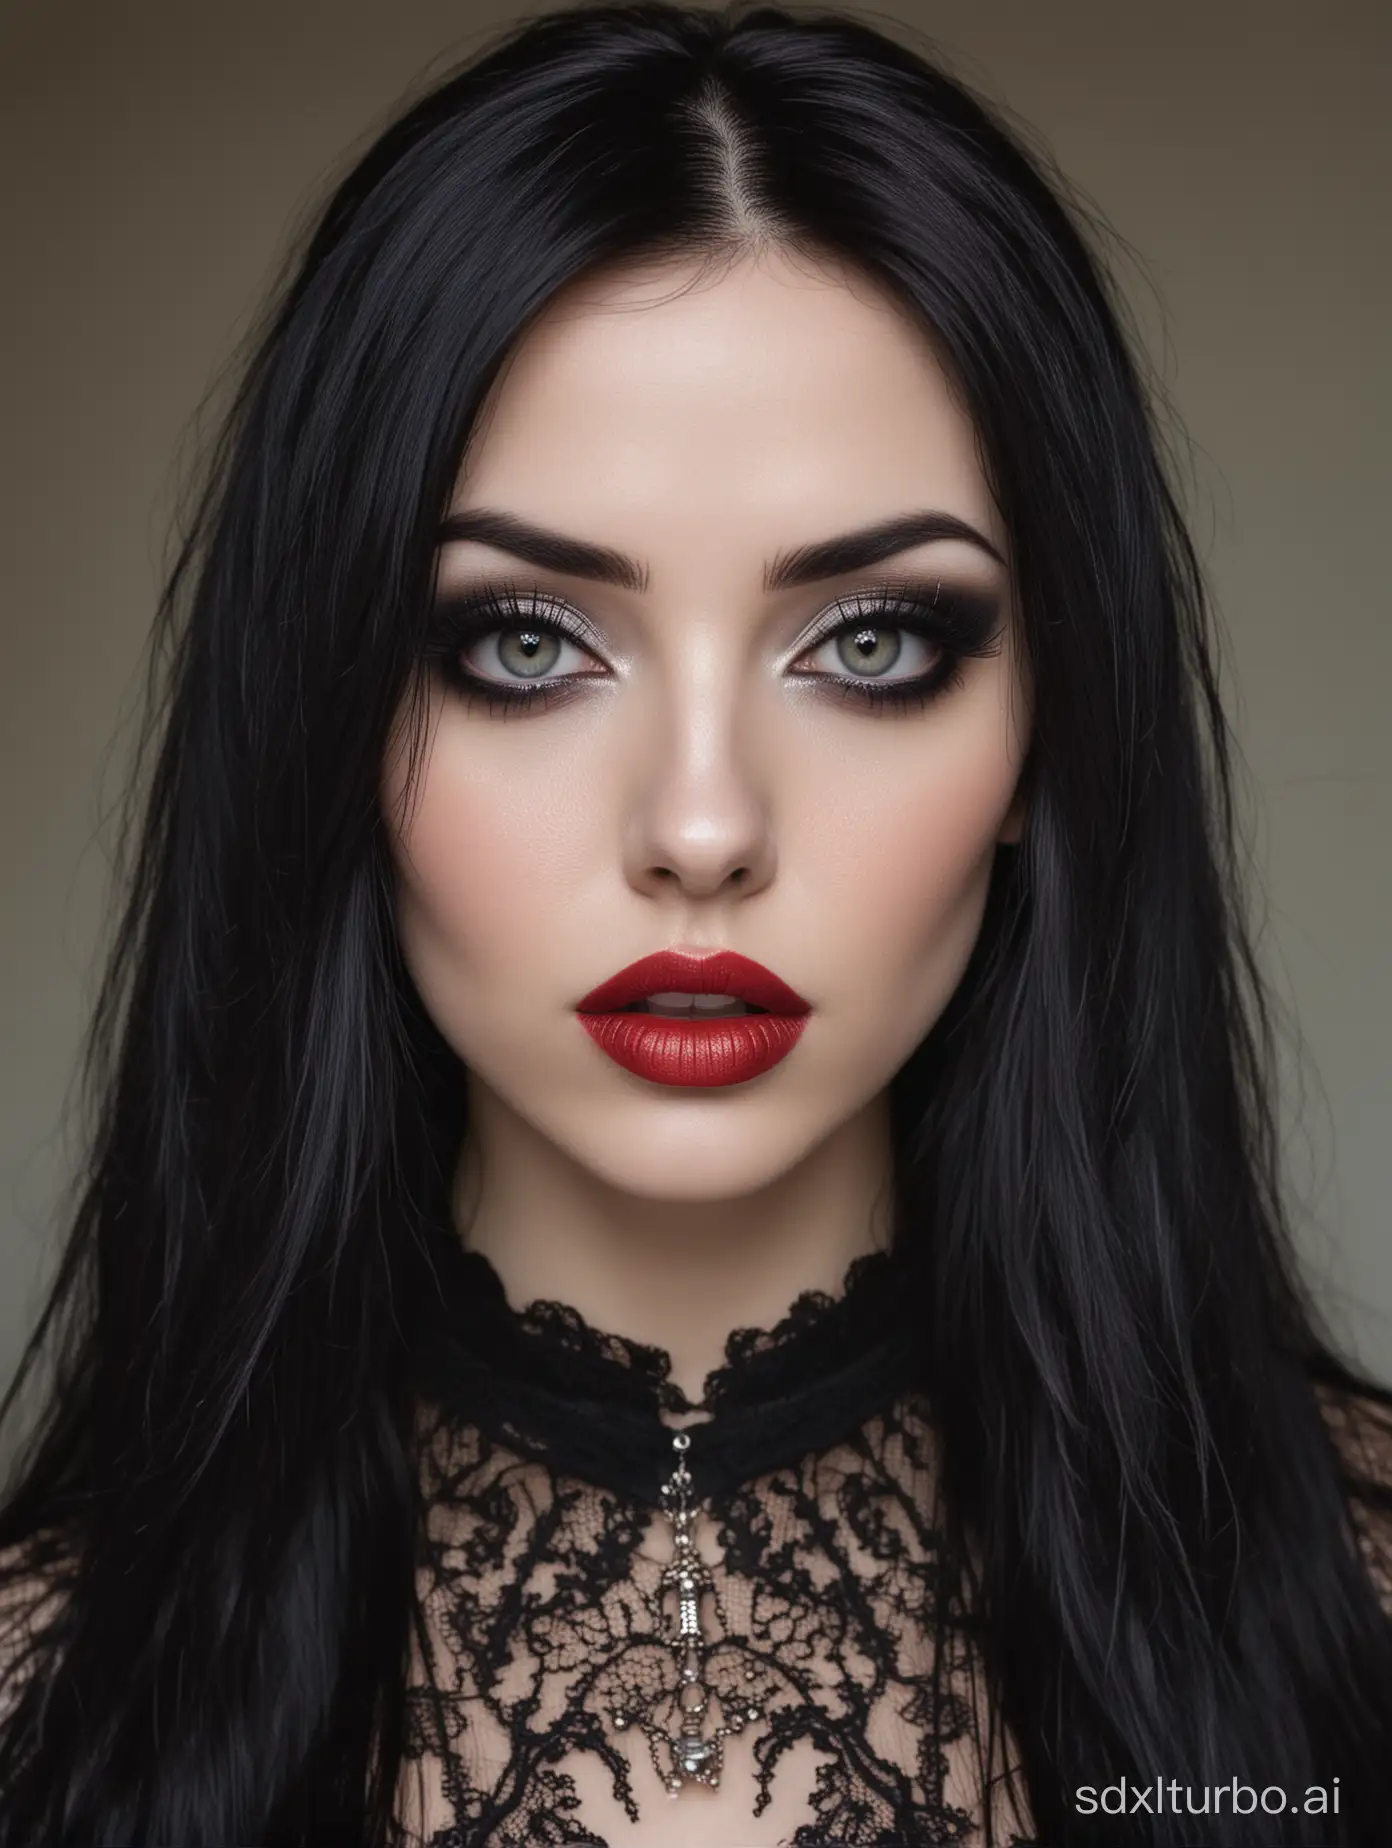 Girl face, gothic style, 30 years old, long black hair, full white eyes, very clear skin, heavy make up, dark make up, gothic make up, eye connection, red lips